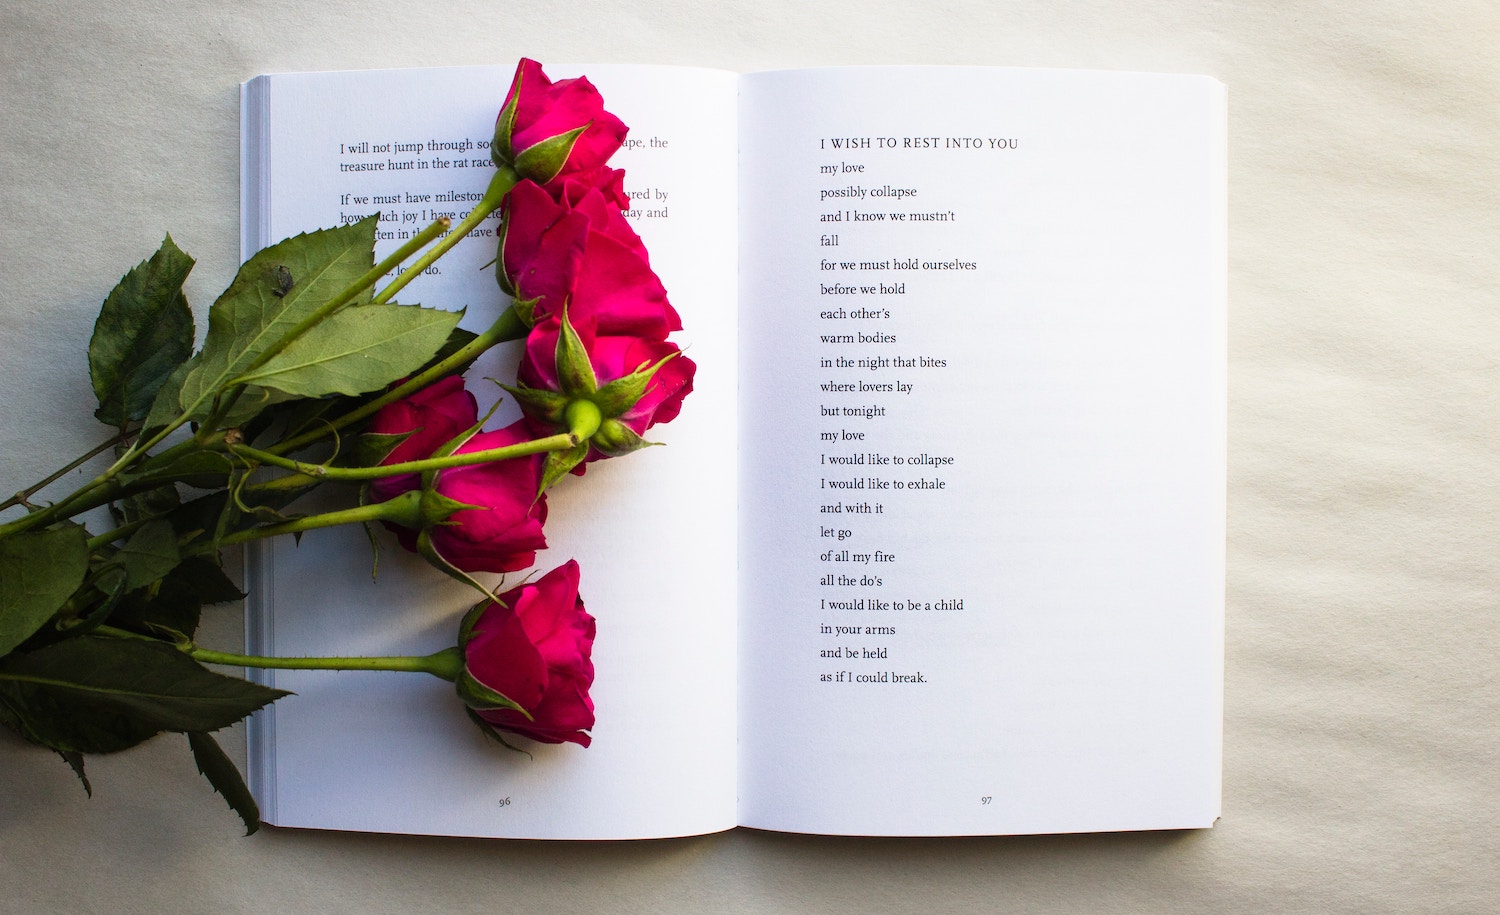 roses on a book representing INFJ quotes by INFJ people